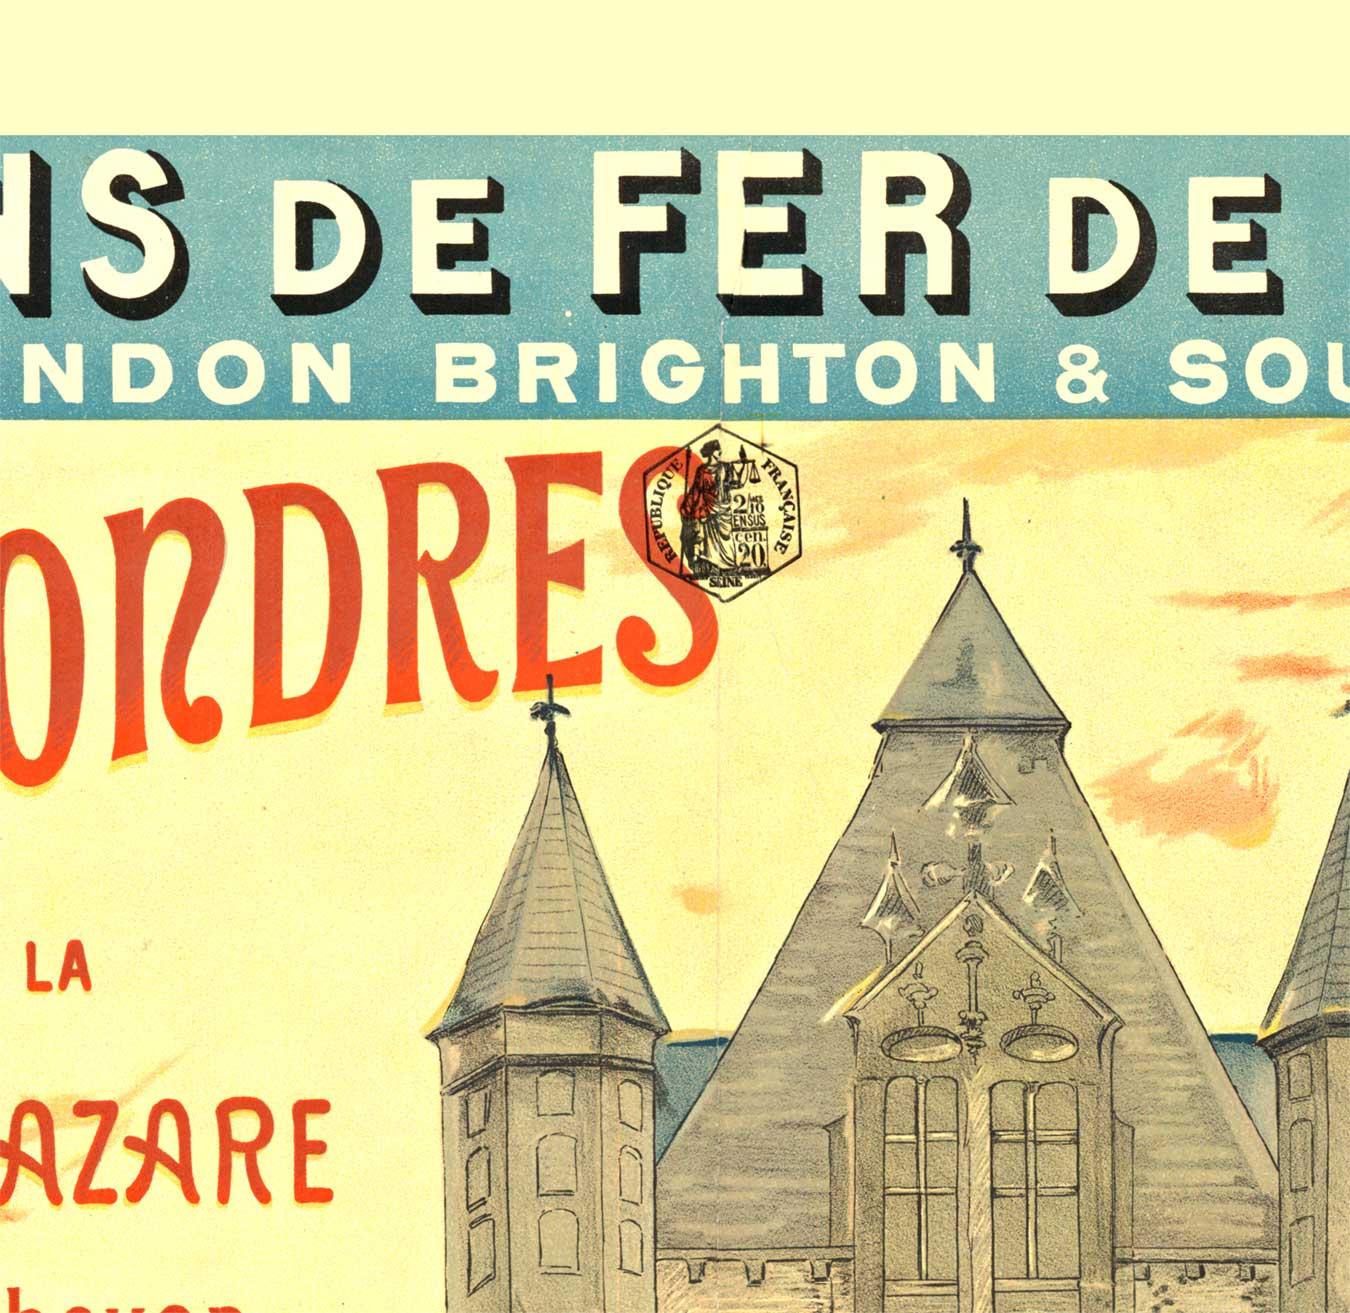 Original ‘Chemin de Fer de L'Ouest; Paris a Londres’ vintage travel poster.    Antique original European travel poster from circa 1880-1900 stone lithograph to travel by train from Paris (boat) to London.   Printed by B. Sirven, Paris, 

The image